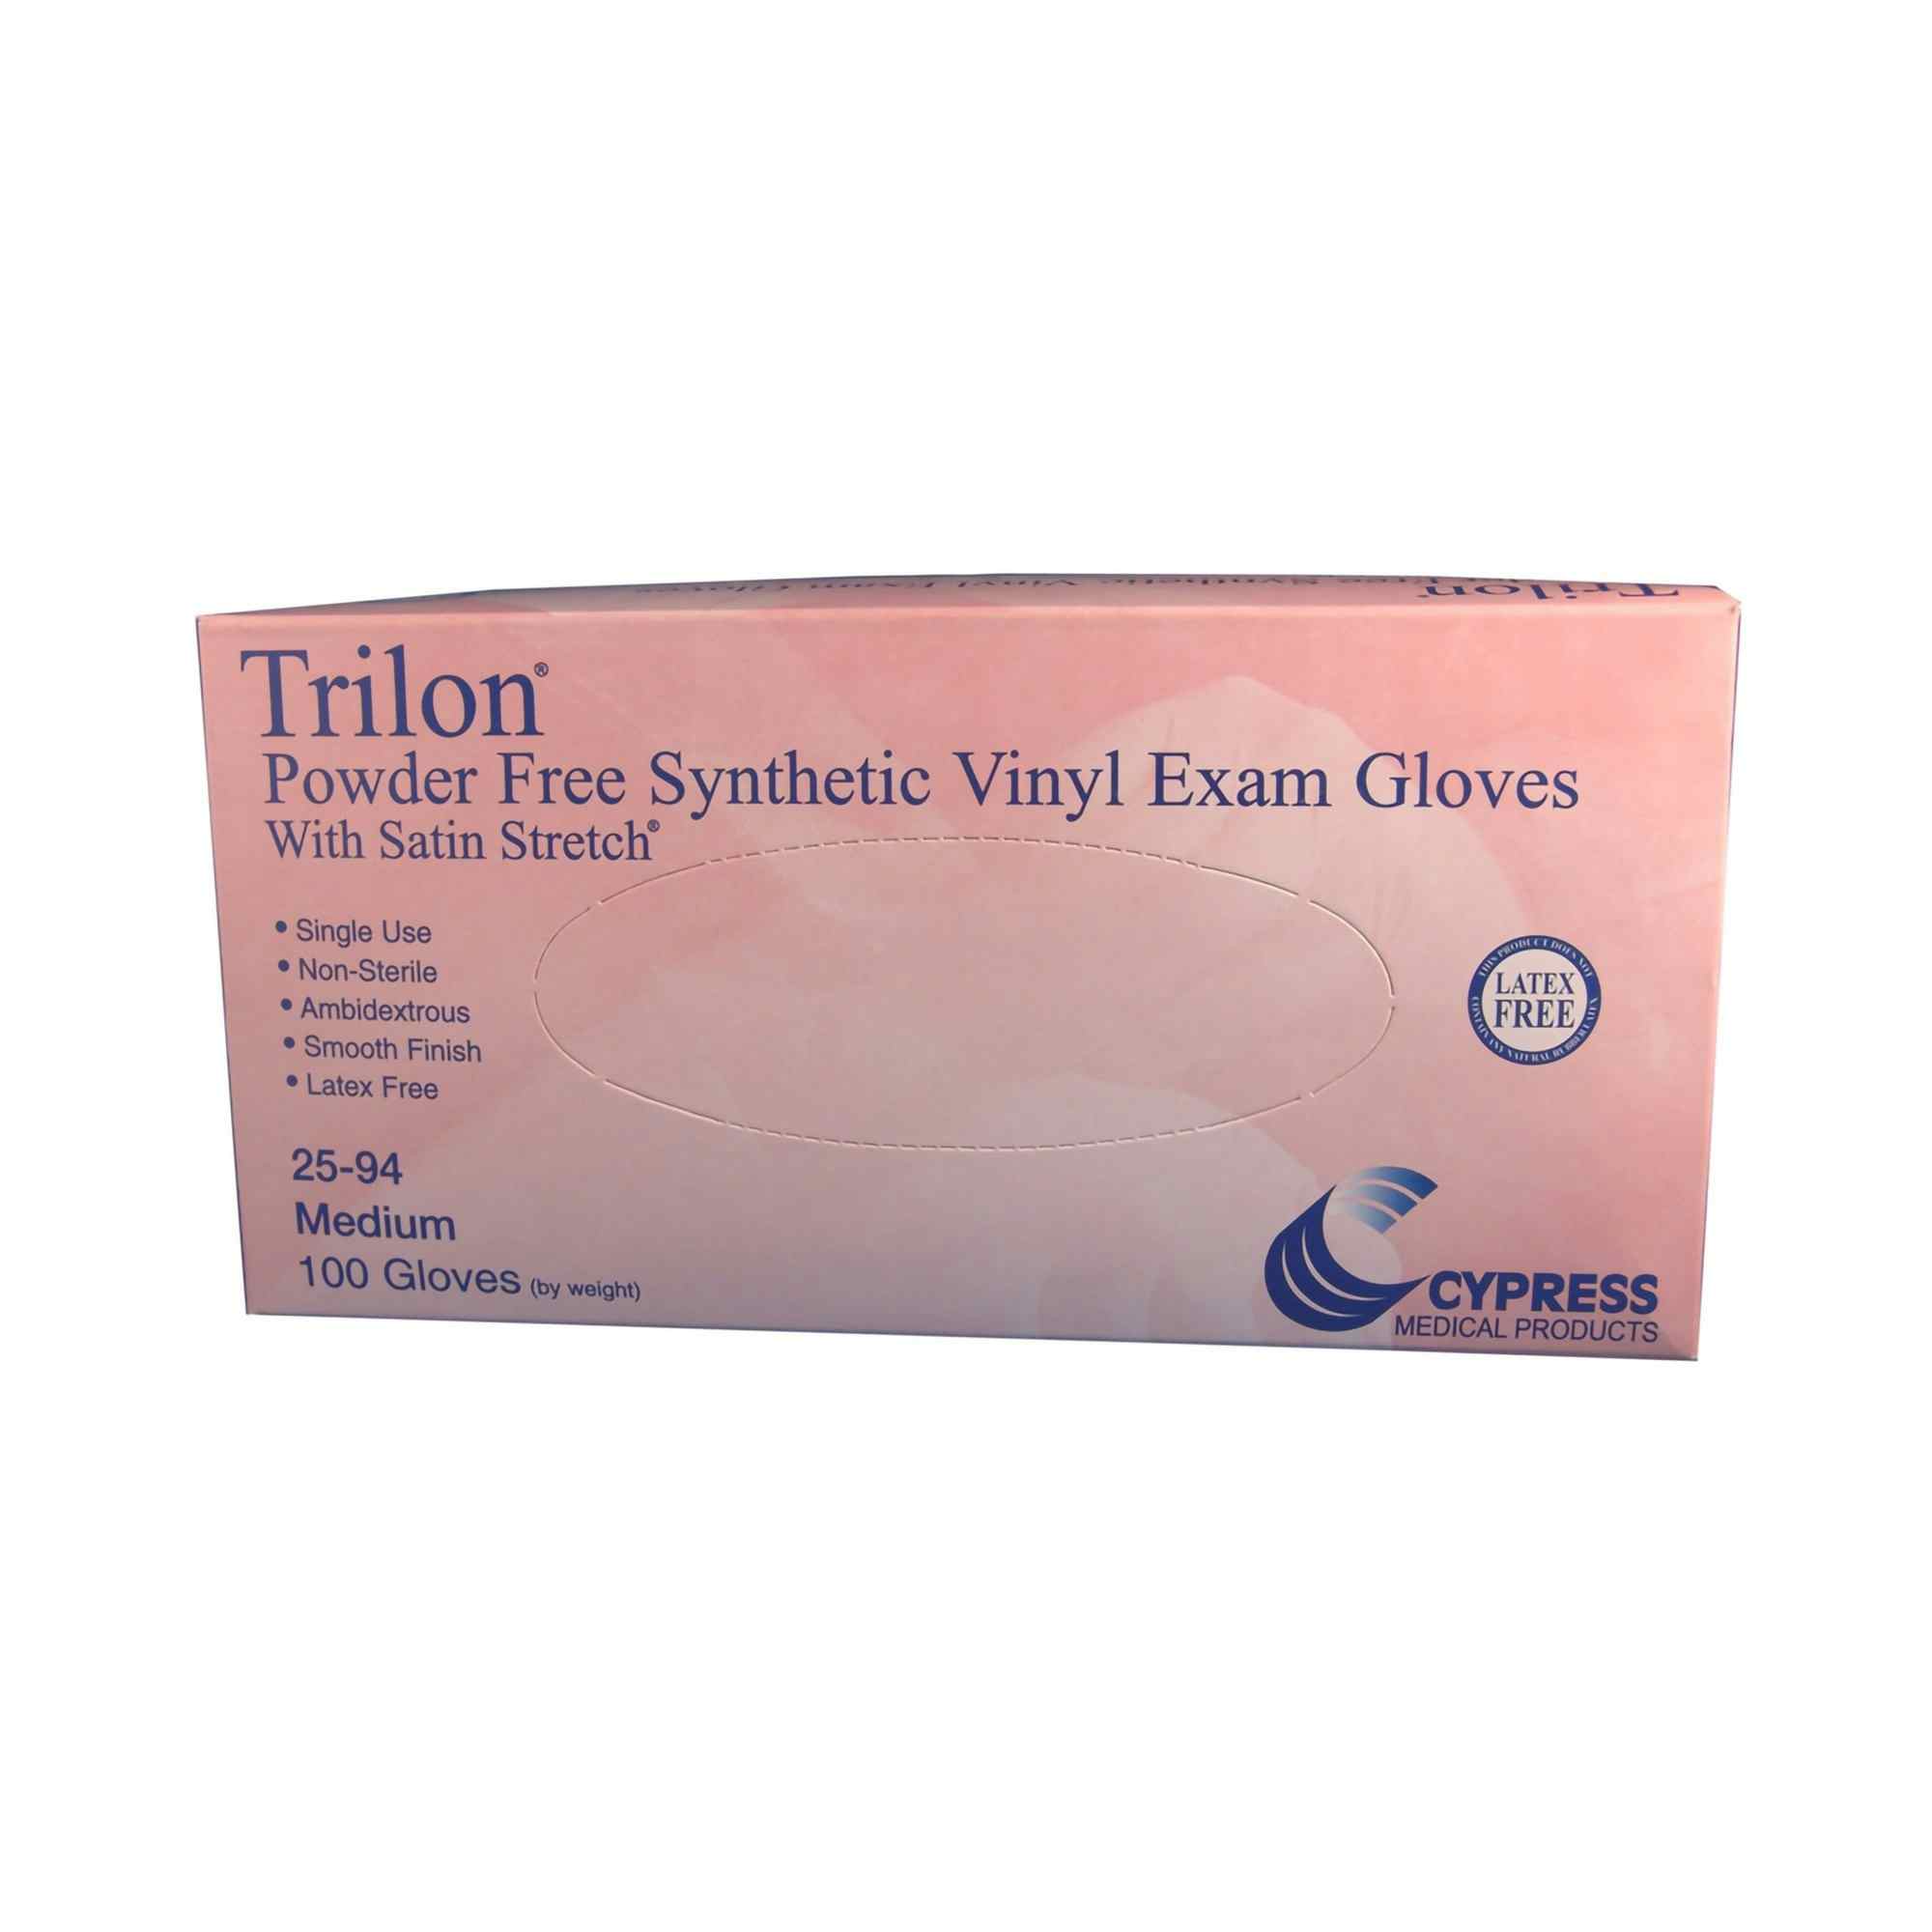 Trilon Powder Free Synthetic Vinyl Exam Glove, Clear, 25-92, Small - Case of 1000